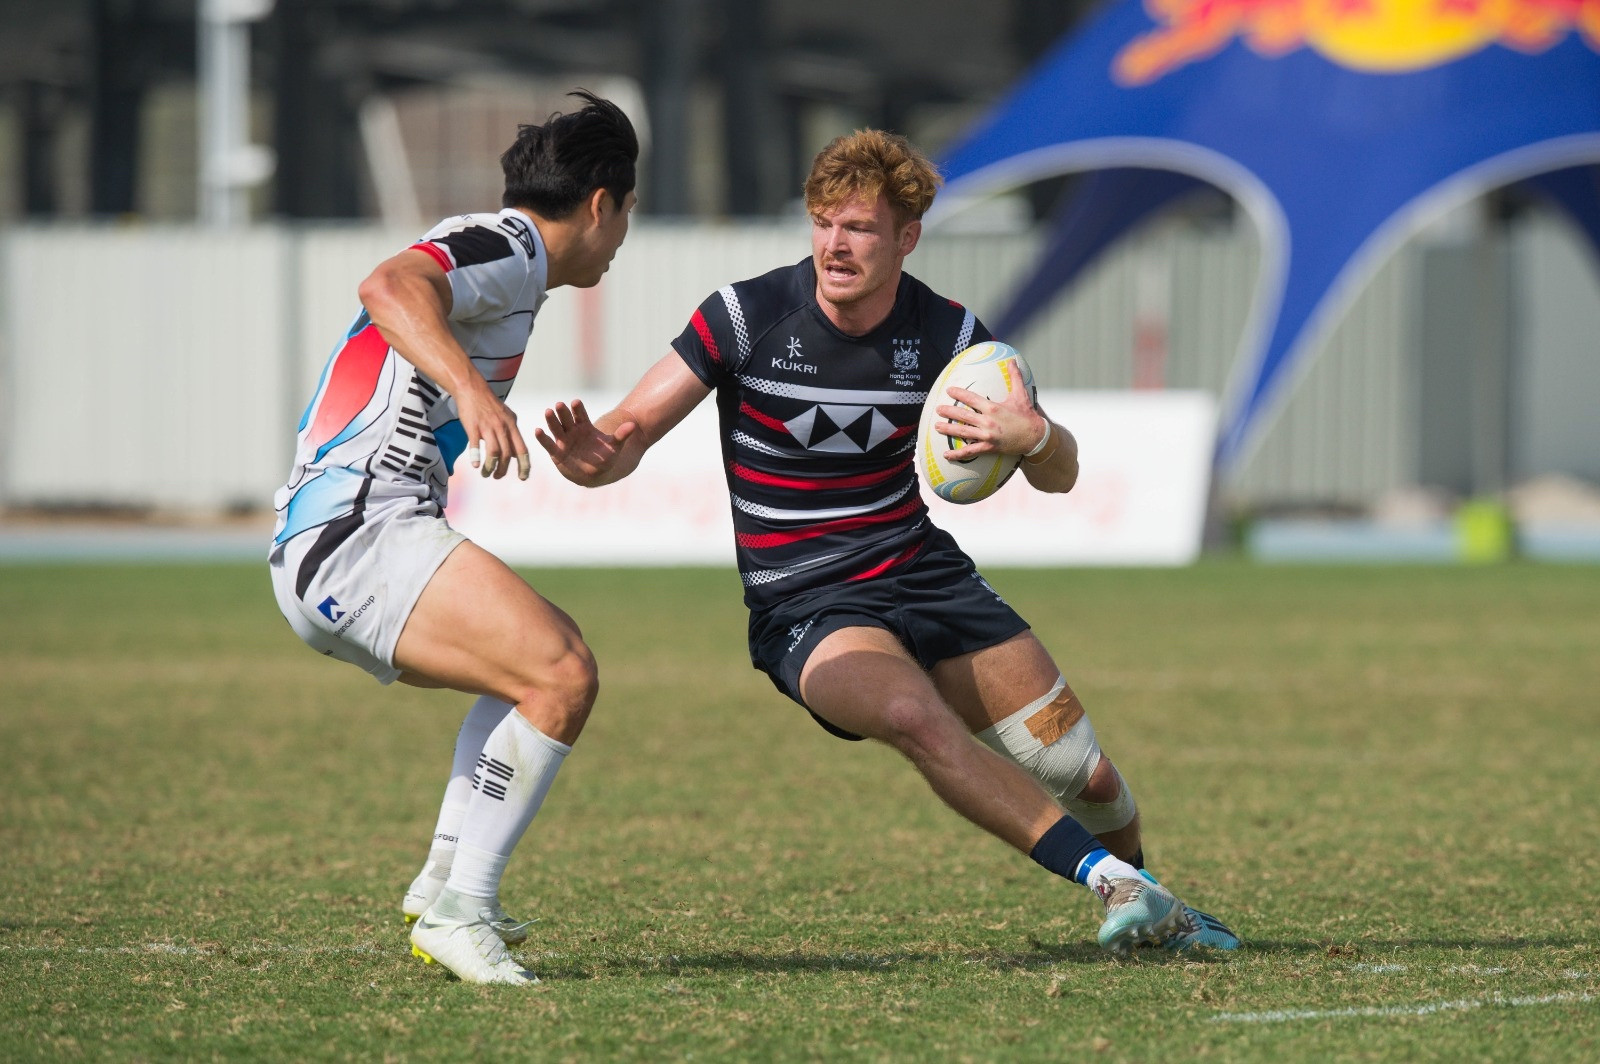 Hong Kong men’s player and Asian Games gold medallists Liam Herbert returns this weekend for the UK Super Sevens Series. Photo: Asia Rugby